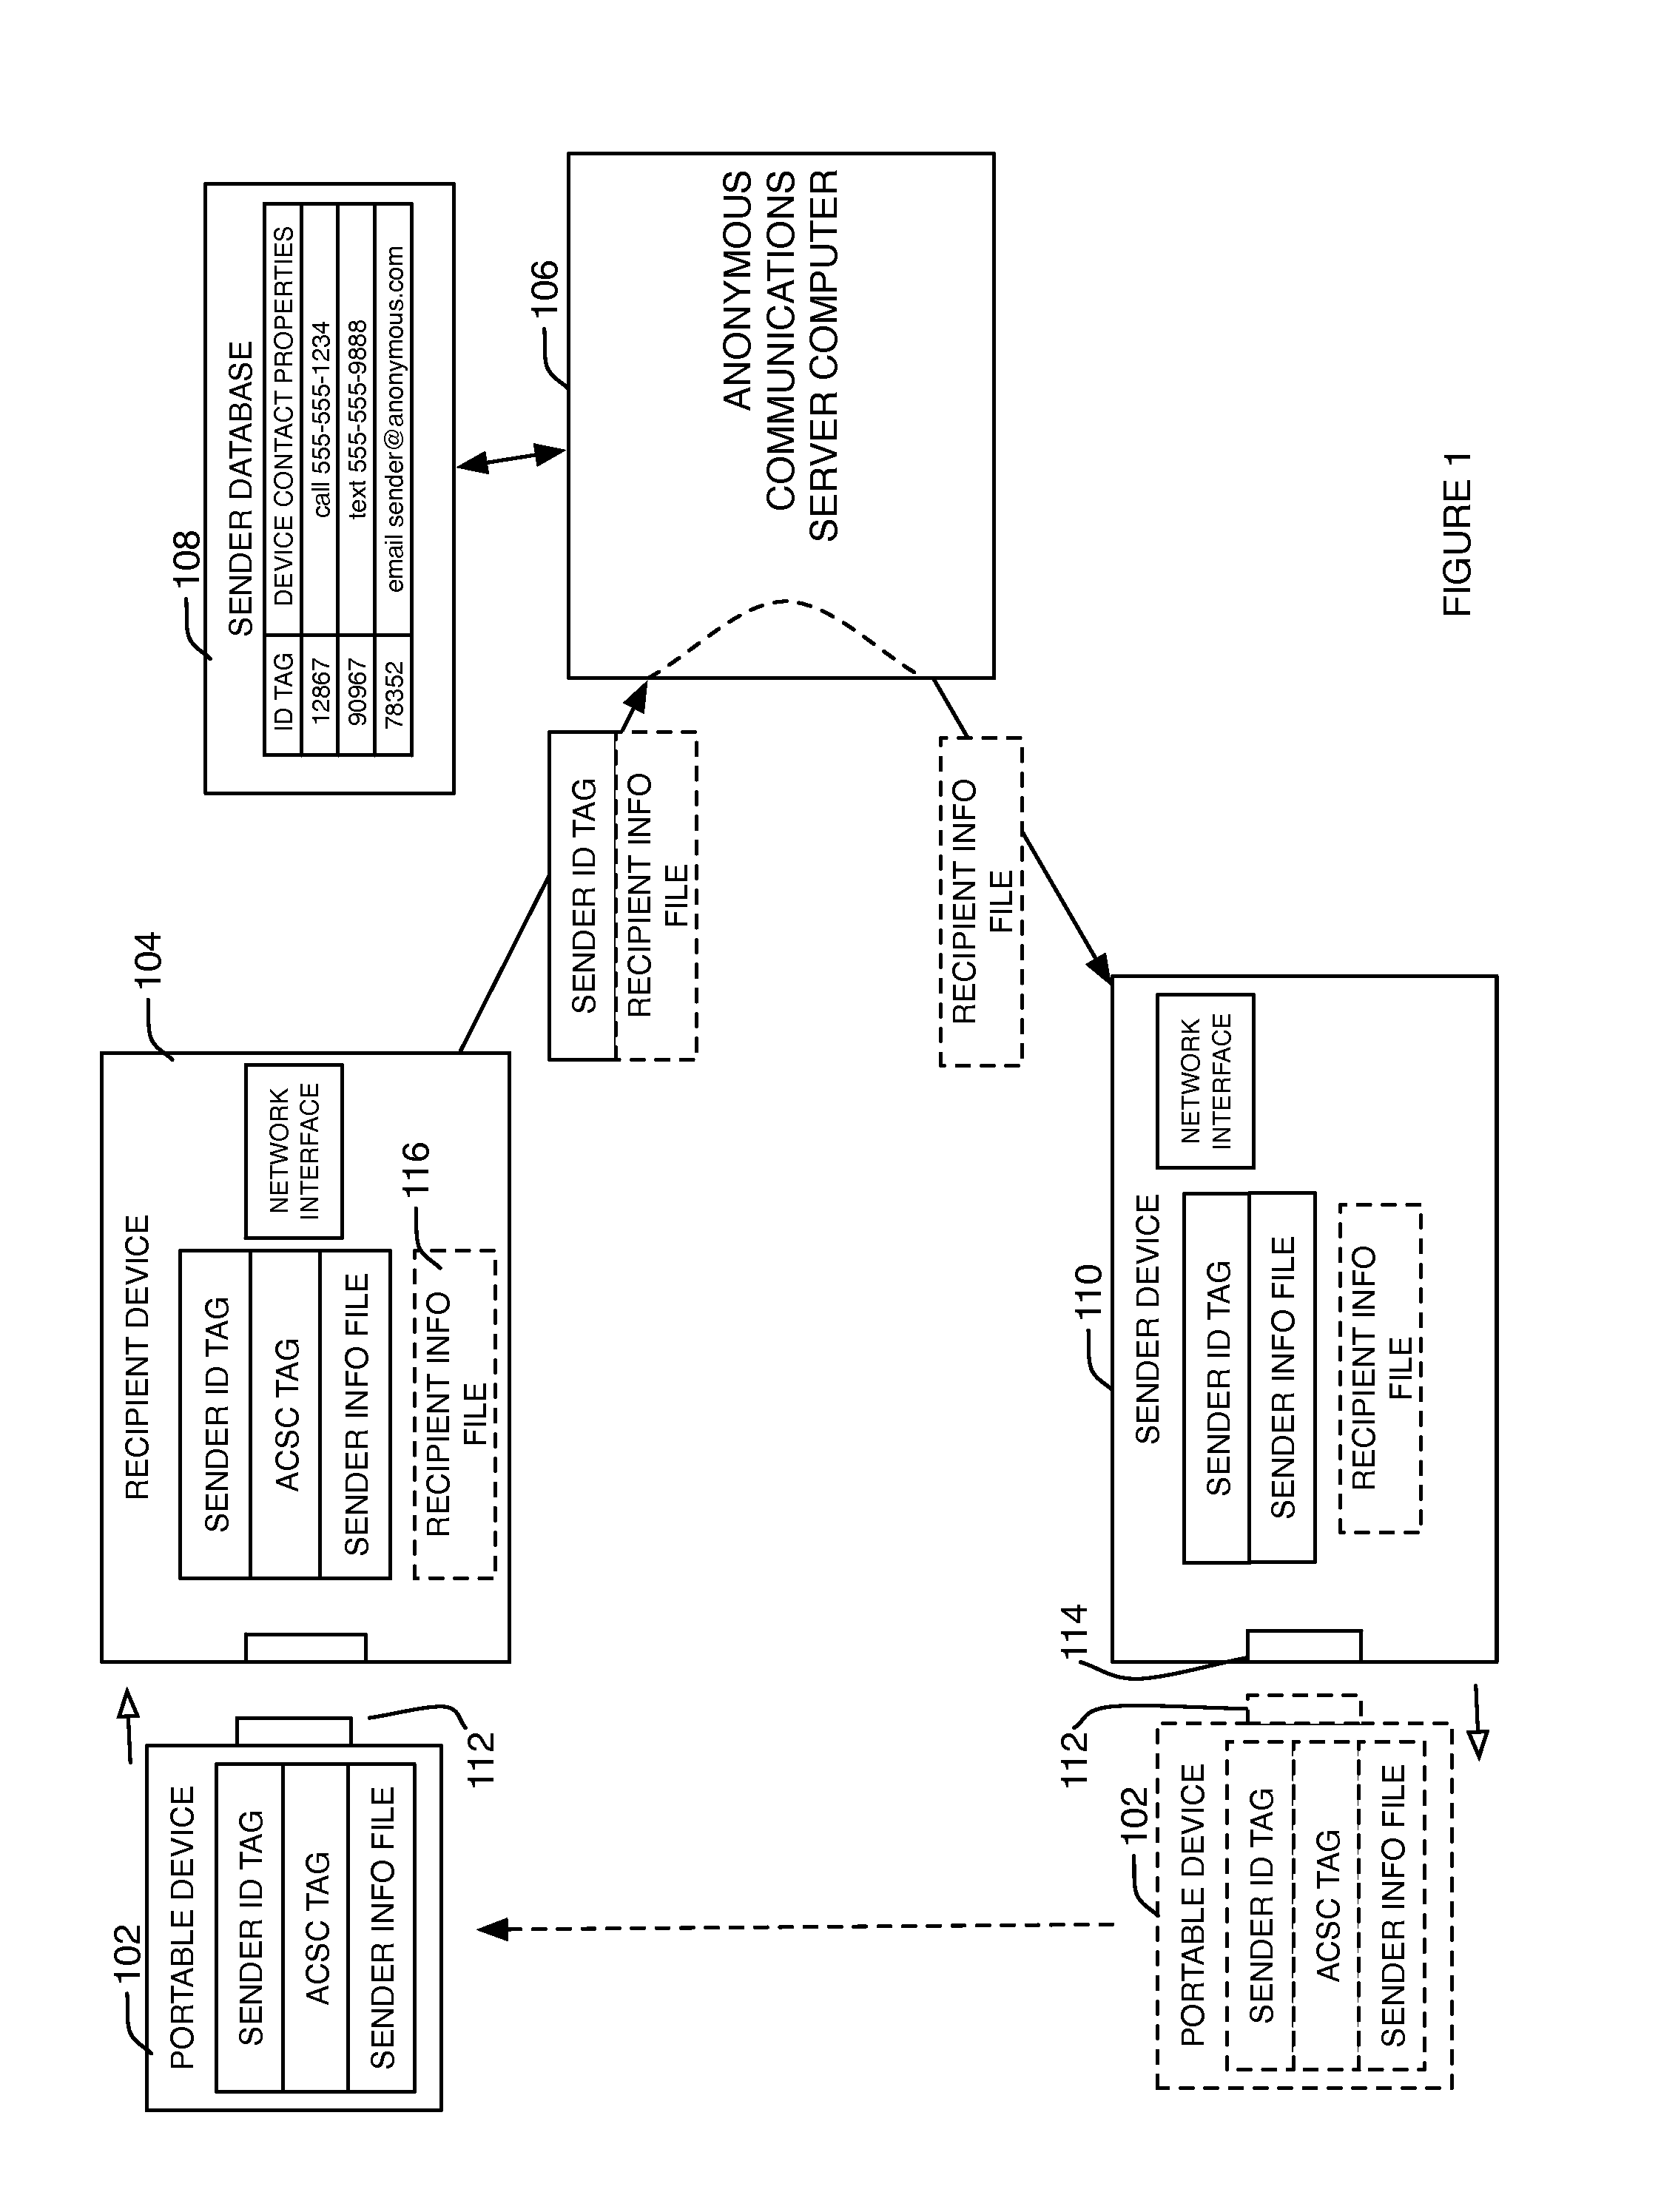 Method and system for enabling anonymous communications between two or more interested parties